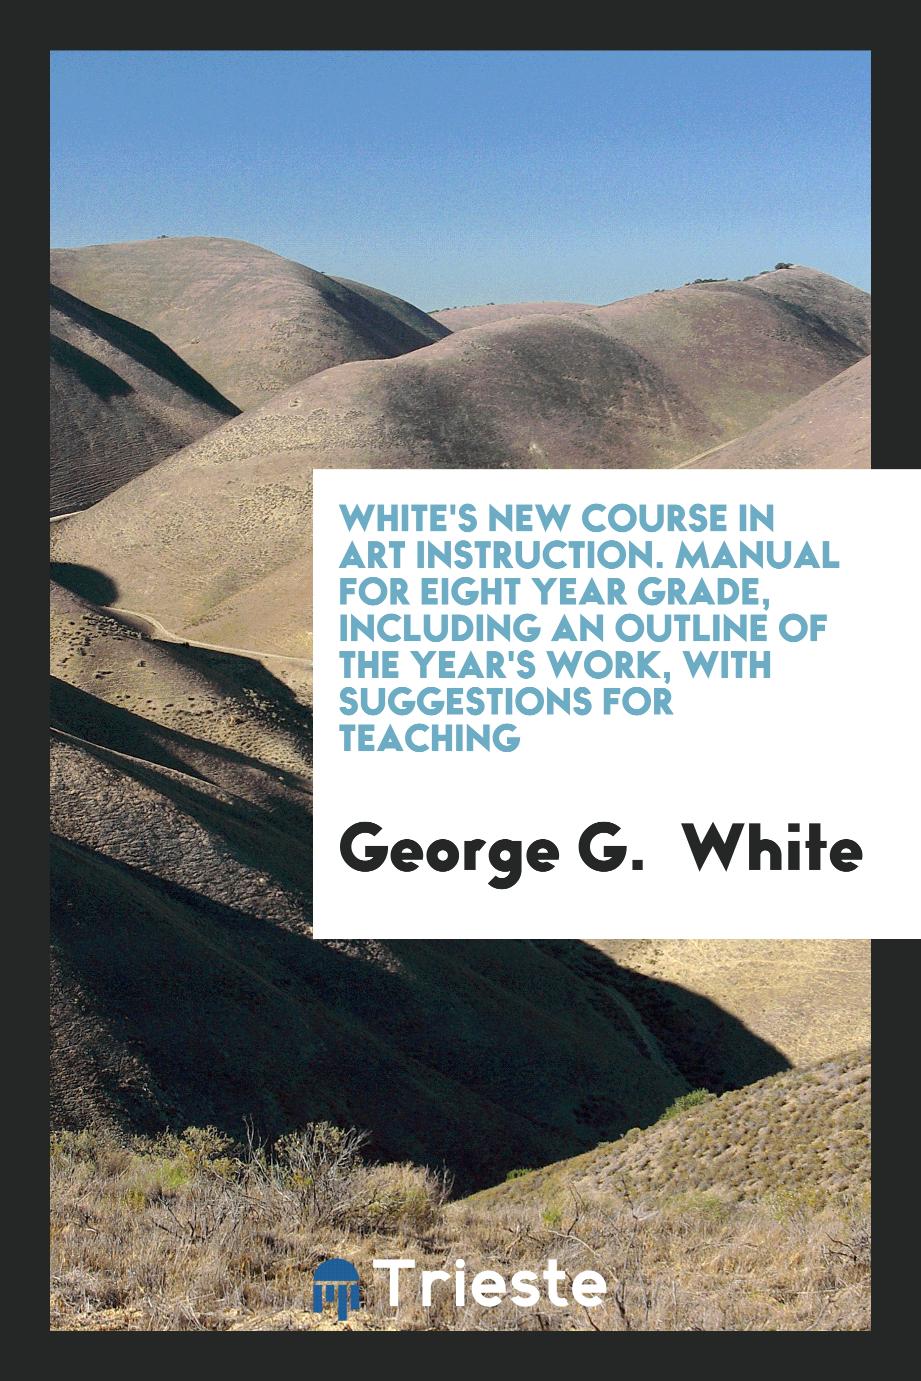 White's New Course in Art Instruction. Manual for Eight Year Grade, Including an Outline of the Year's Work, with Suggestions for Teaching